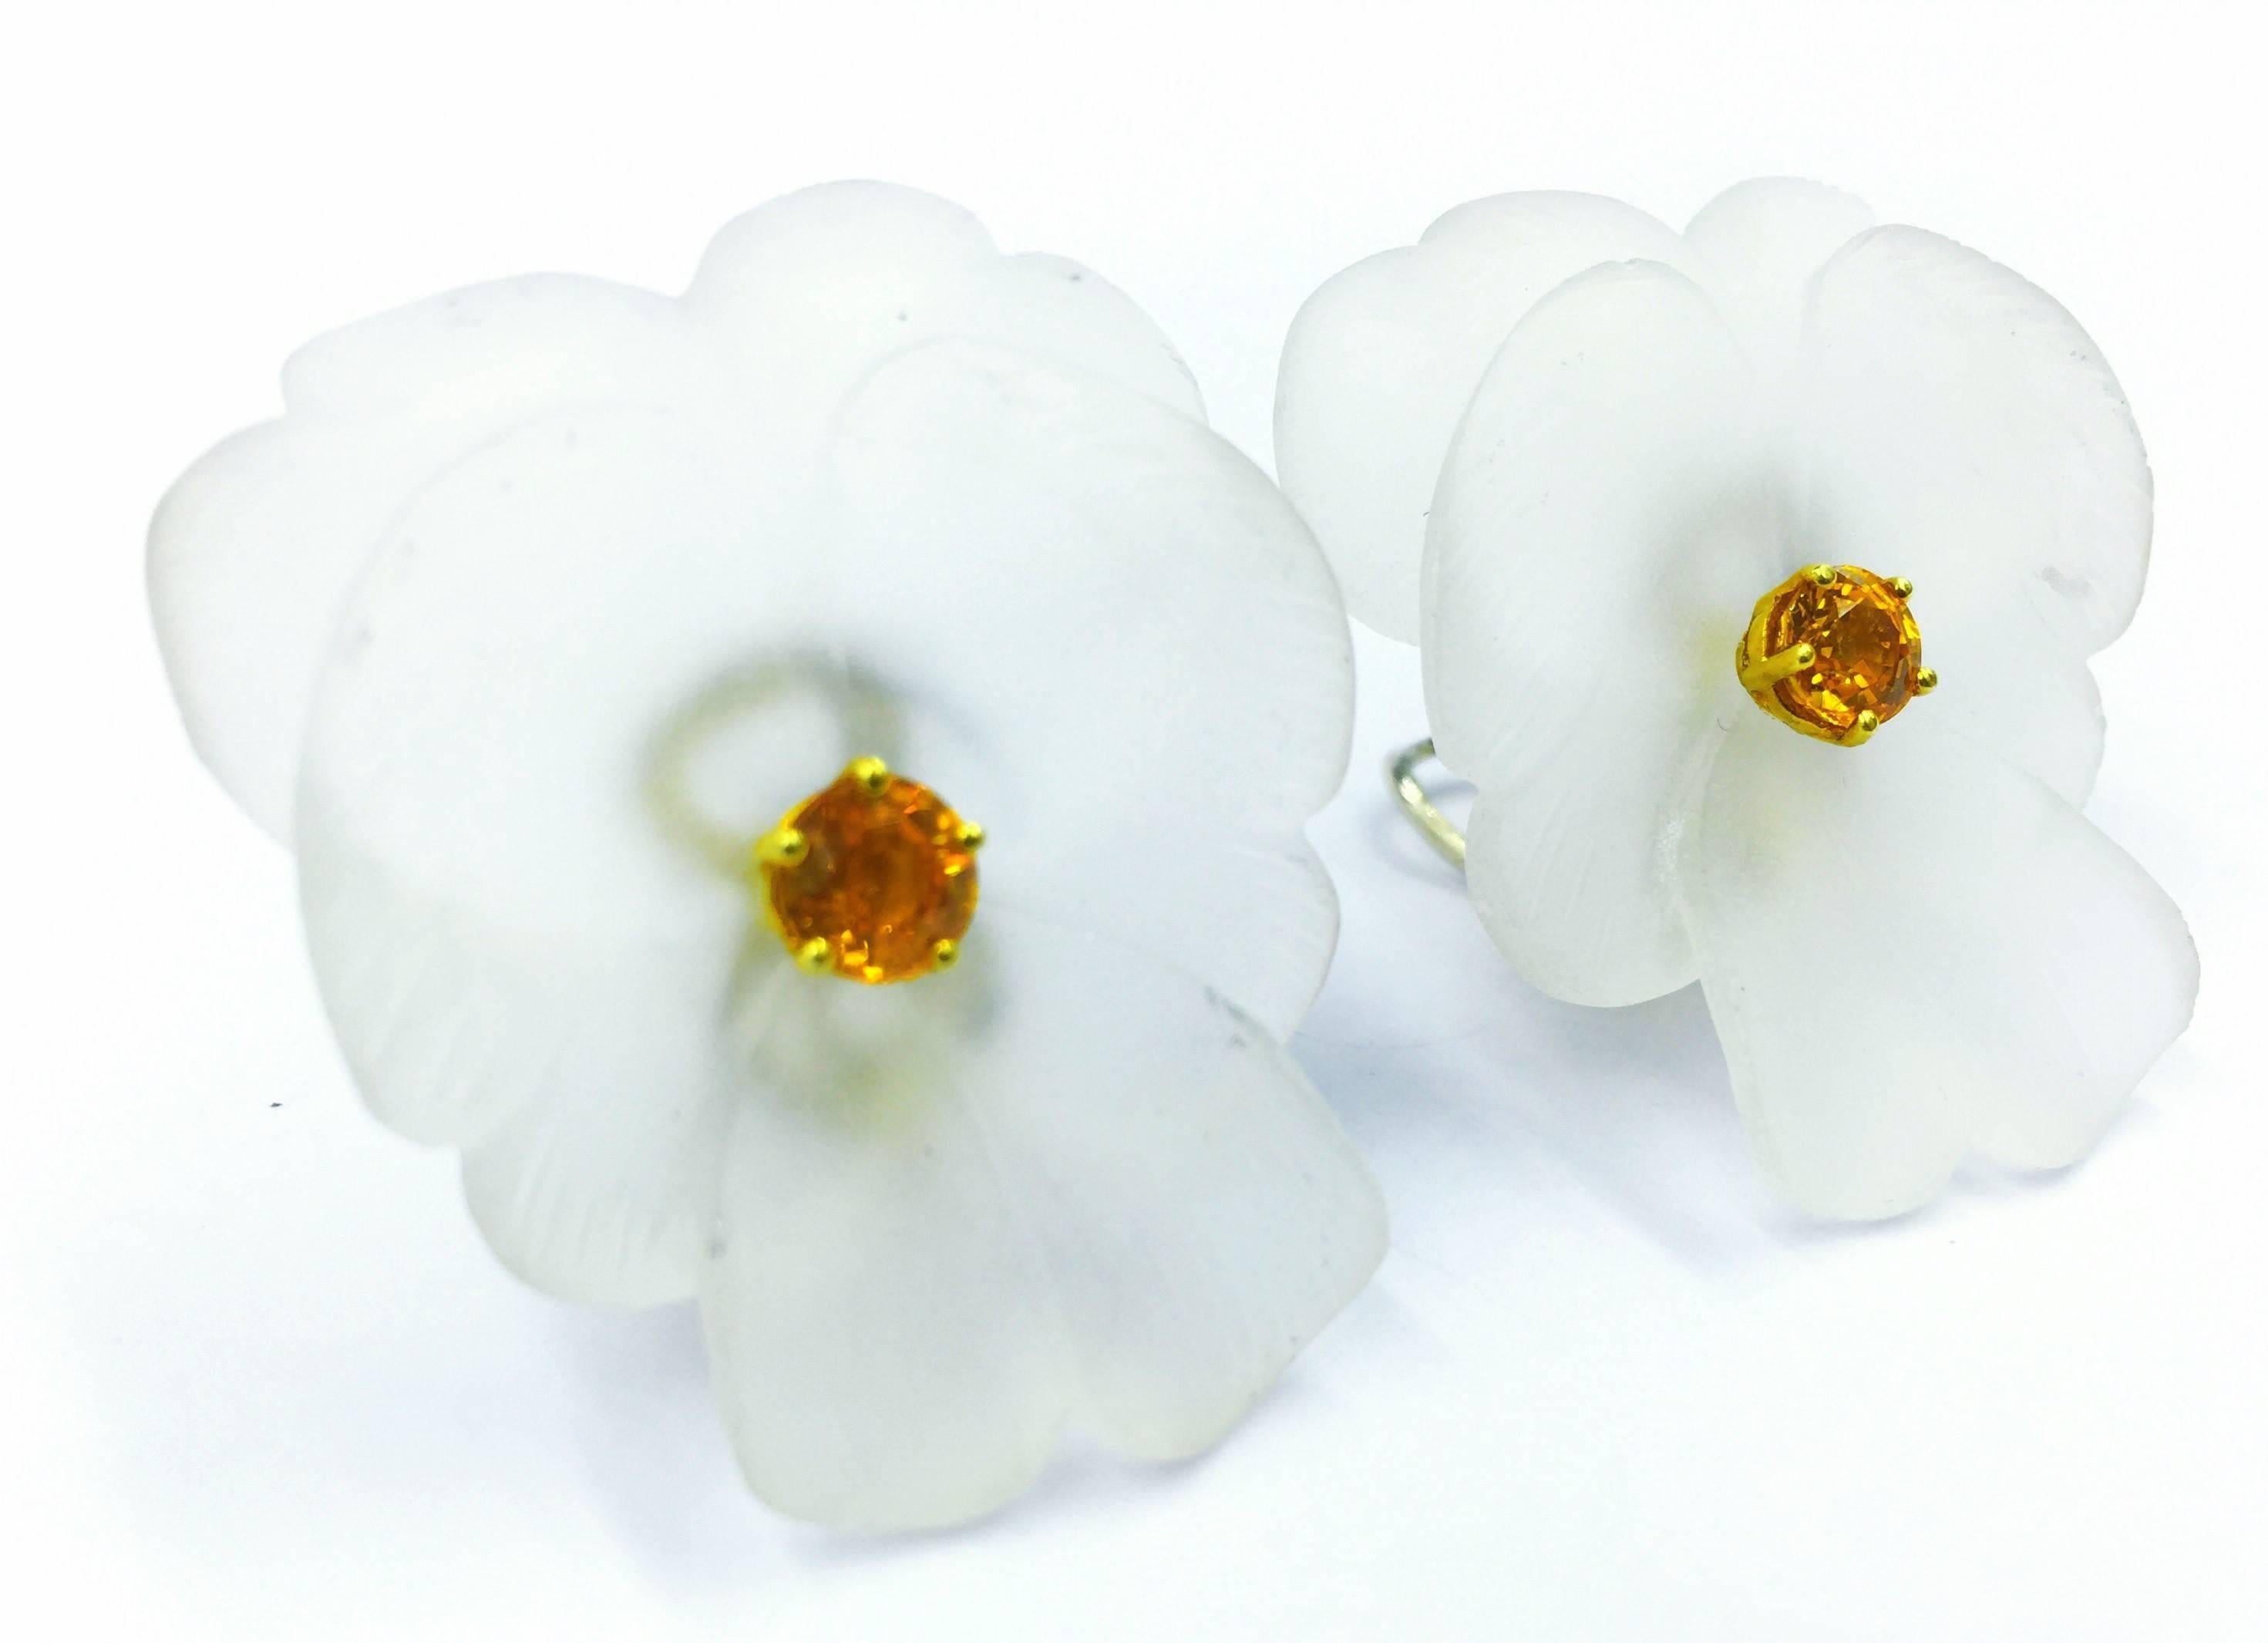 These rare and beautiful earrings are an example of Paloma Picasso's artistic genius during perhaps her most active period designing for Tiffany & Co. Two Hand Carved Rock Crystal Pansy Flowers with 2.00 carats of yellow sapphires set with 18kt